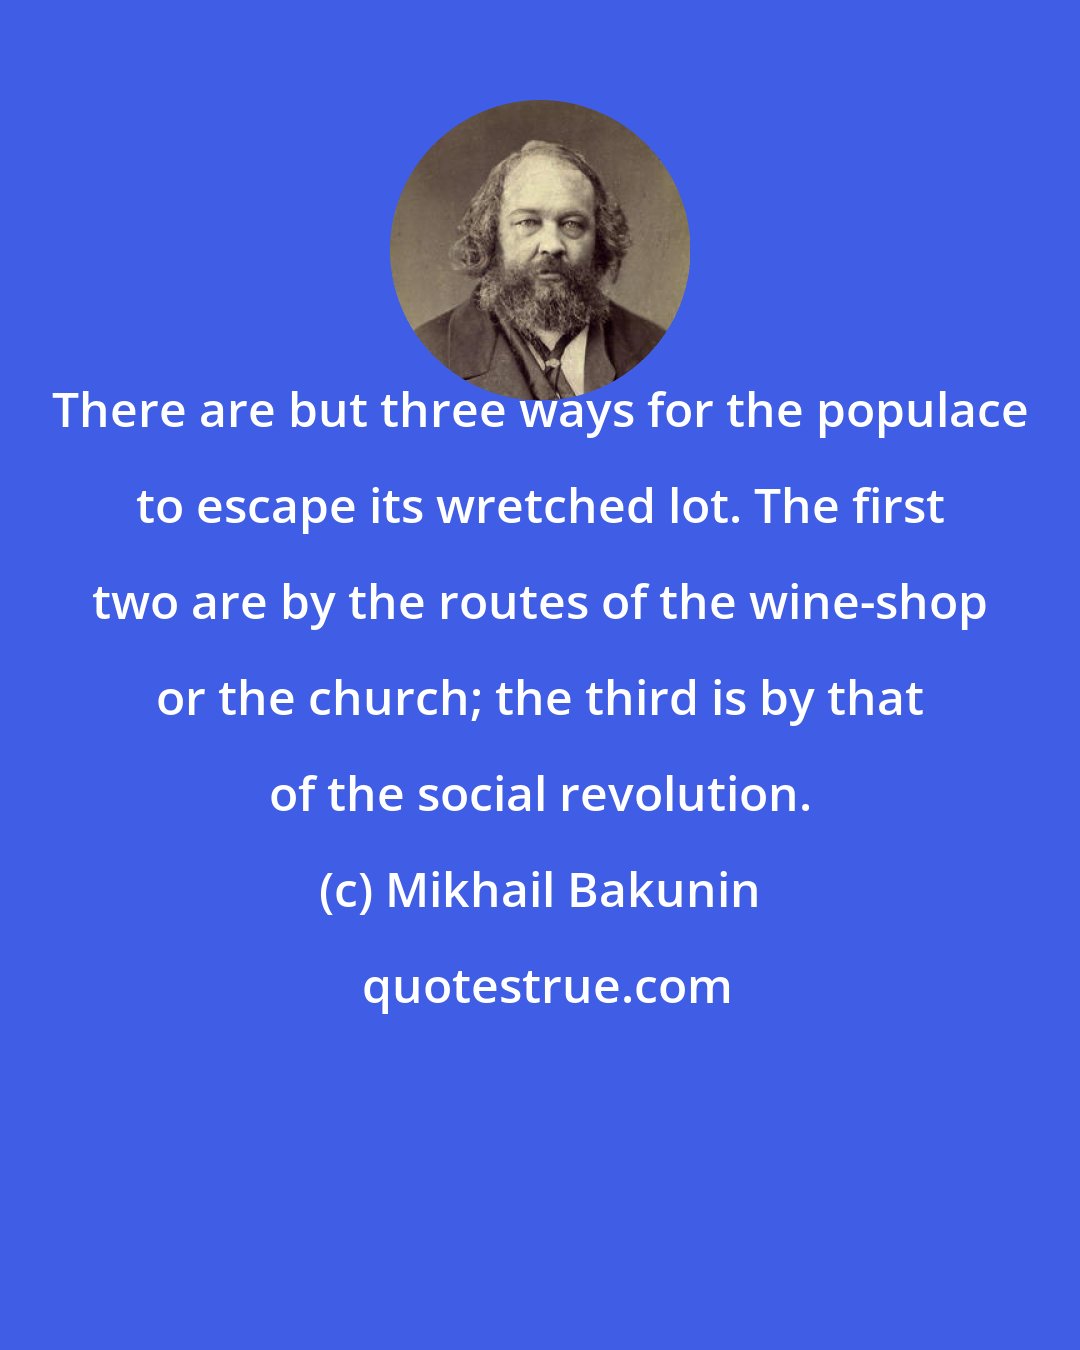 Mikhail Bakunin: There are but three ways for the populace to escape its wretched lot. The first two are by the routes of the wine-shop or the church; the third is by that of the social revolution.